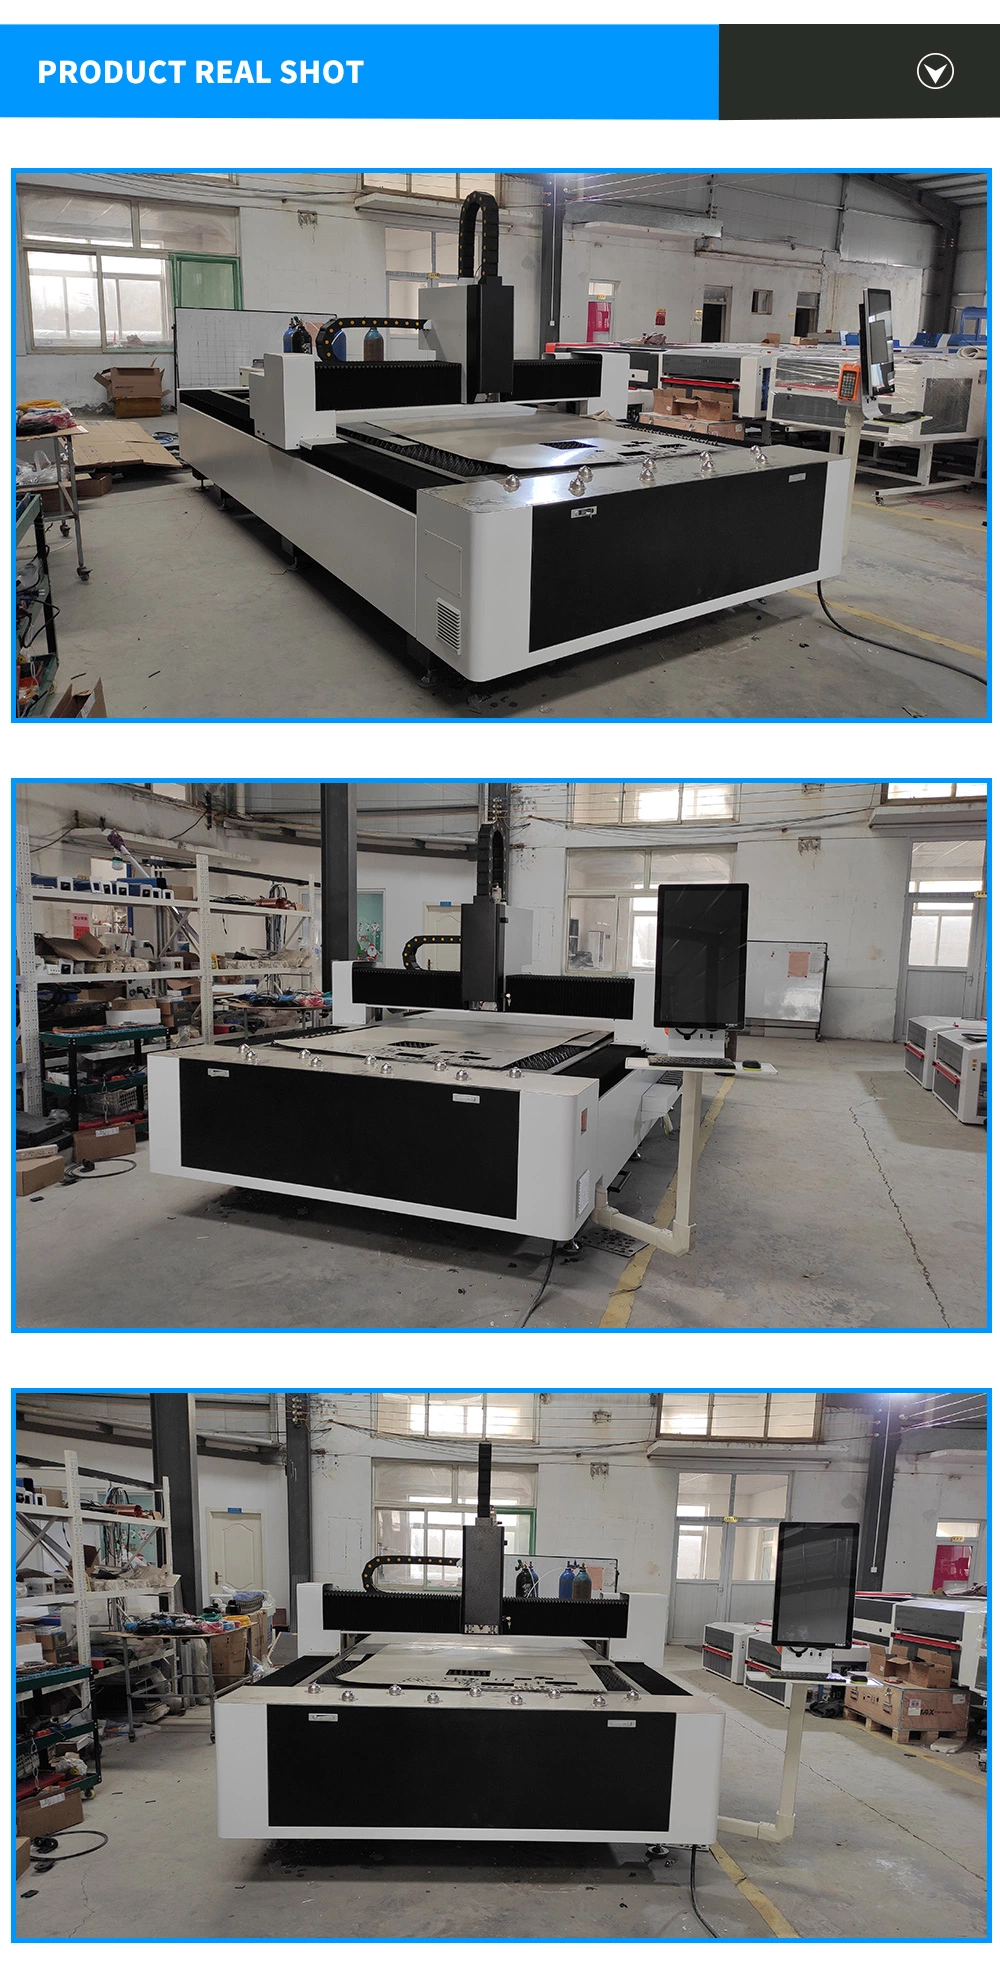 3015 CNC Fiber Laser Cutting Machine 1000W 2000W Ipg Raycus Laser Cutter for Cutting Metal, Stainless Steel, Carbon Steel, Aluminum